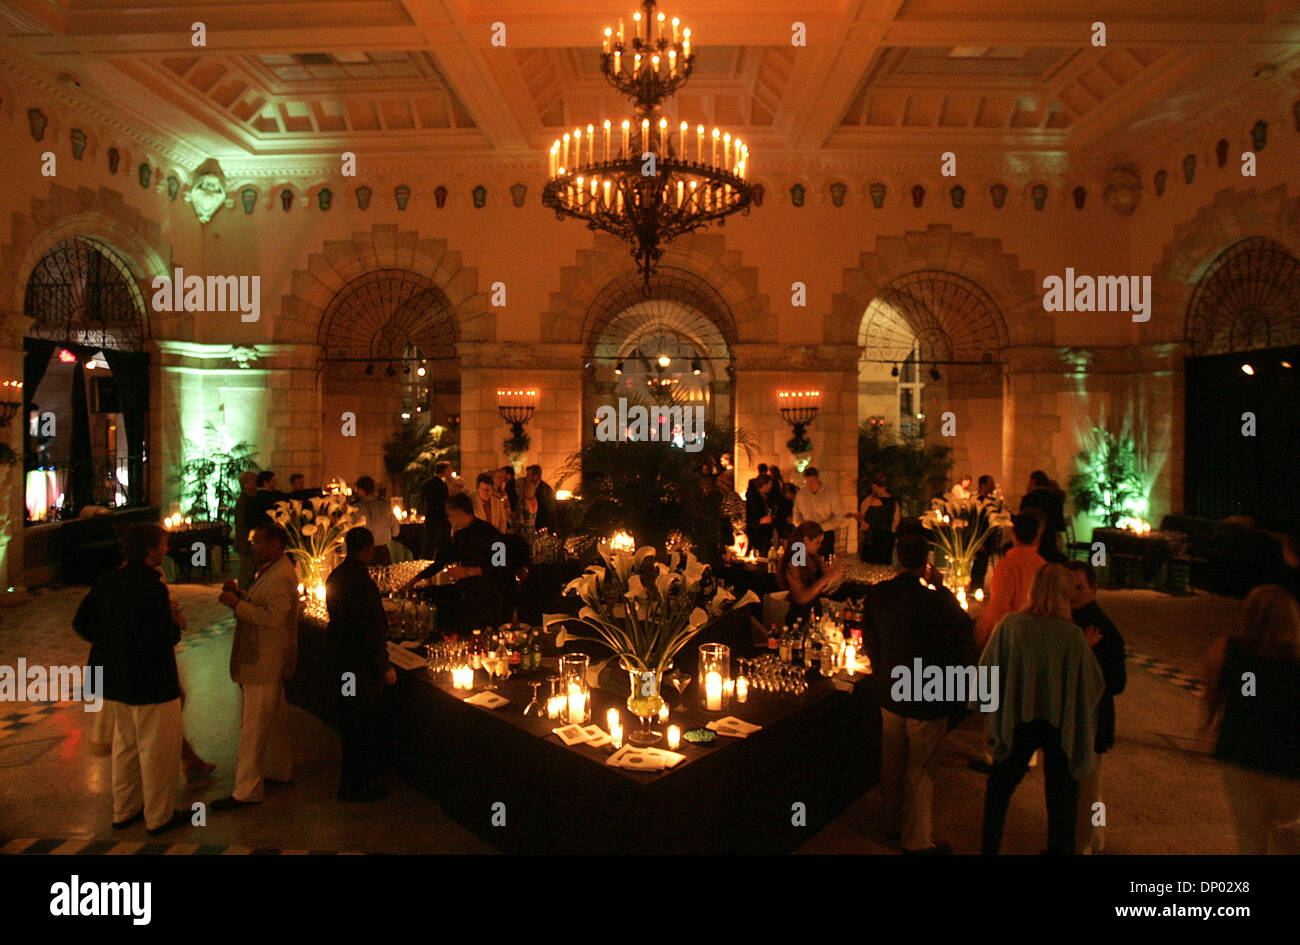 Feb 26, 2006; Palm Beach, FL, USA; The Whitehall Society held a 'Dancing After Dark' gala at the Flagler Museum in Palm Beach.  Mandatory Credit: Photo by Thomas Cordy/Palm Beach Post /ZUMA Press. (©) Copyright 2006 by Palm Beach Post Stock Photo